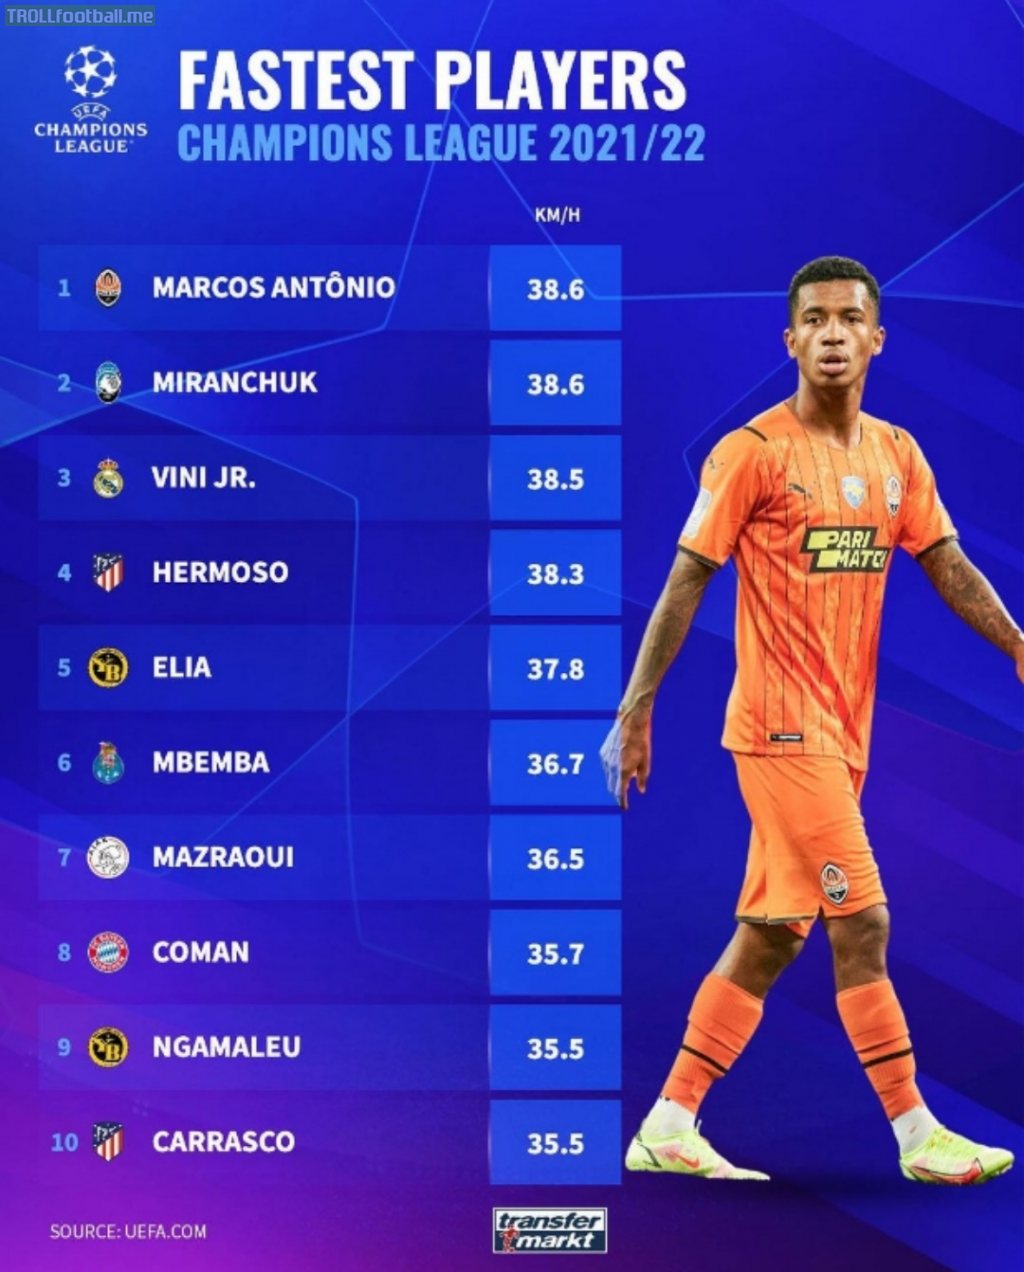 Fastest players in the Champions League 2021/22